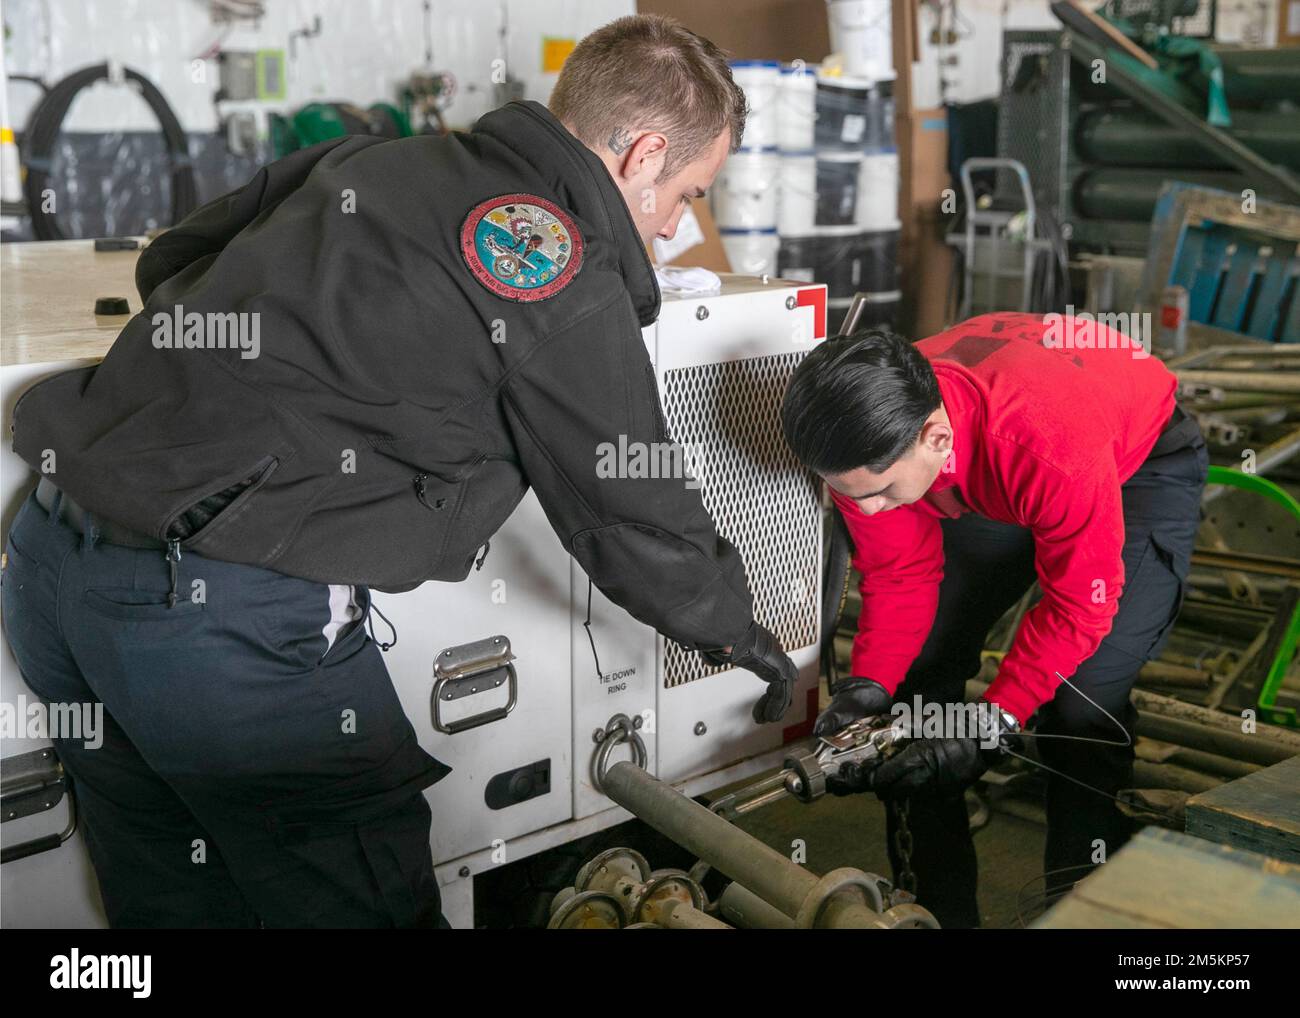 Aviation Ordnanceman Airman Robert Parsons, left, from Aurora, Colorado, and Aviation Ordnanceman Airman Andres Perez, from Fontana, California, both assigned to the "Black Lions" of Strike Fighter Squadron (VFA) 213, secure a hydraulic servicing unit in USS Gerald R. Ford’s (CVN 78) hangar bay, March 23, 2022. Ford is underway in the Atlantic Ocean conducting flight deck certification and air wing carrier qualifications as part of the ship's tailored basic phase prior to operational deployment. Stock Photo